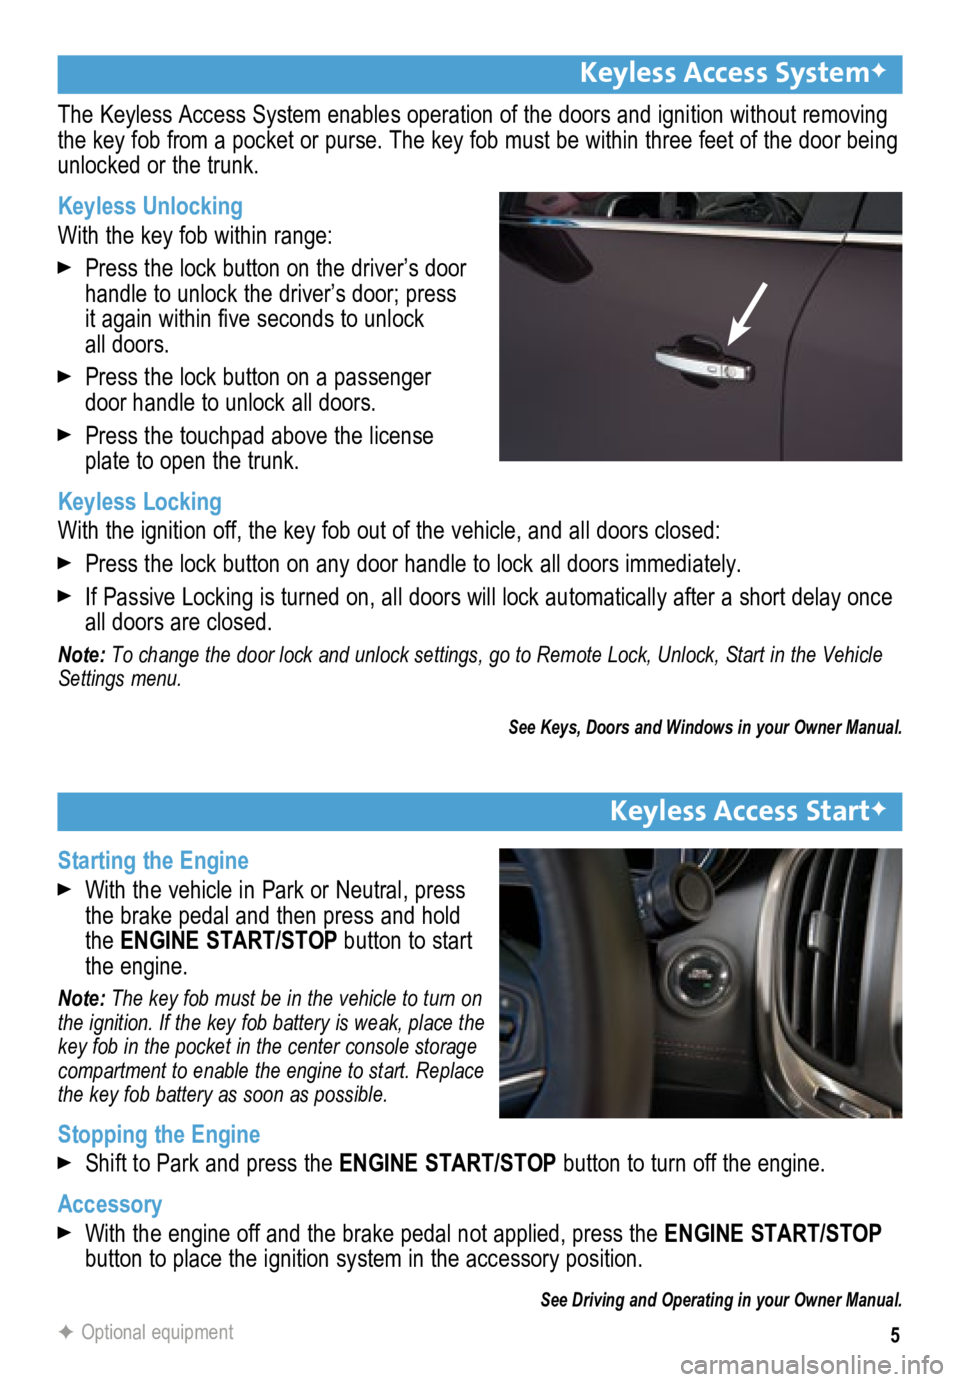 BUICK LACROSSE 2015  Get To Know Guide 5
Keyless Access SystemF 
The Keyless Access System enables operation of the doors and ignition wi\
thout removing 
the key fob from a pocket or purse. The key fob must be within three fee\
t of the d